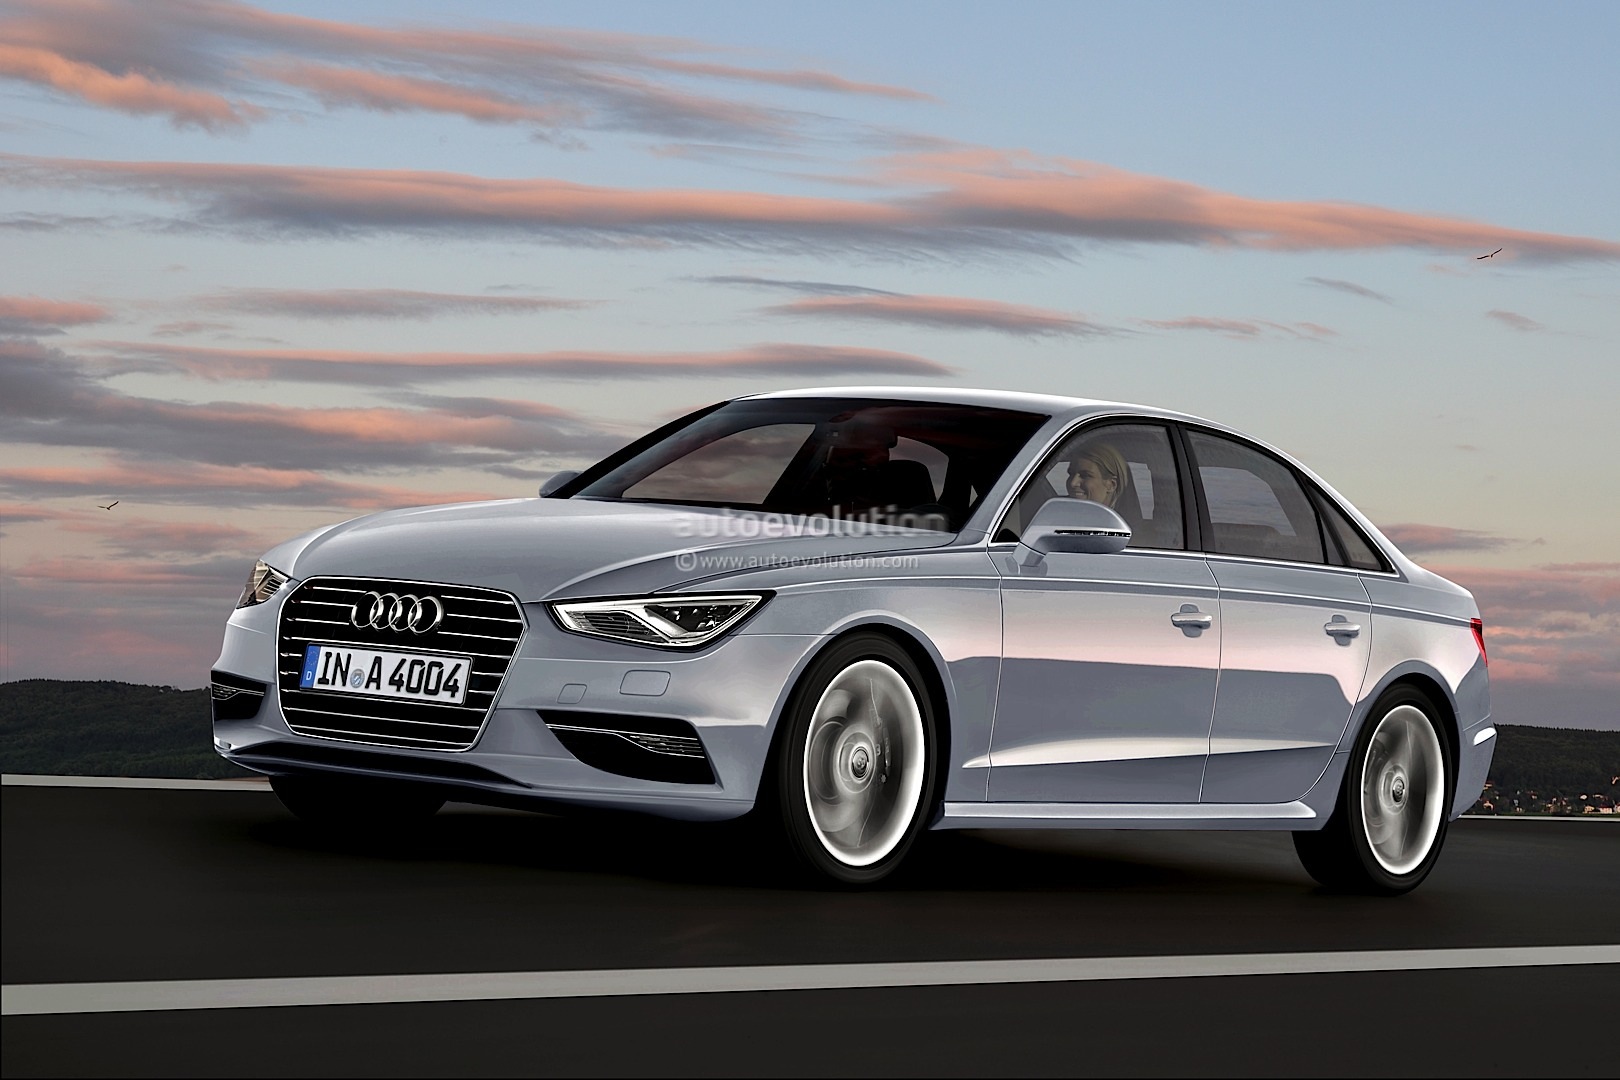 2014 Audi A4 (B9) Rendering Released - autoevolution